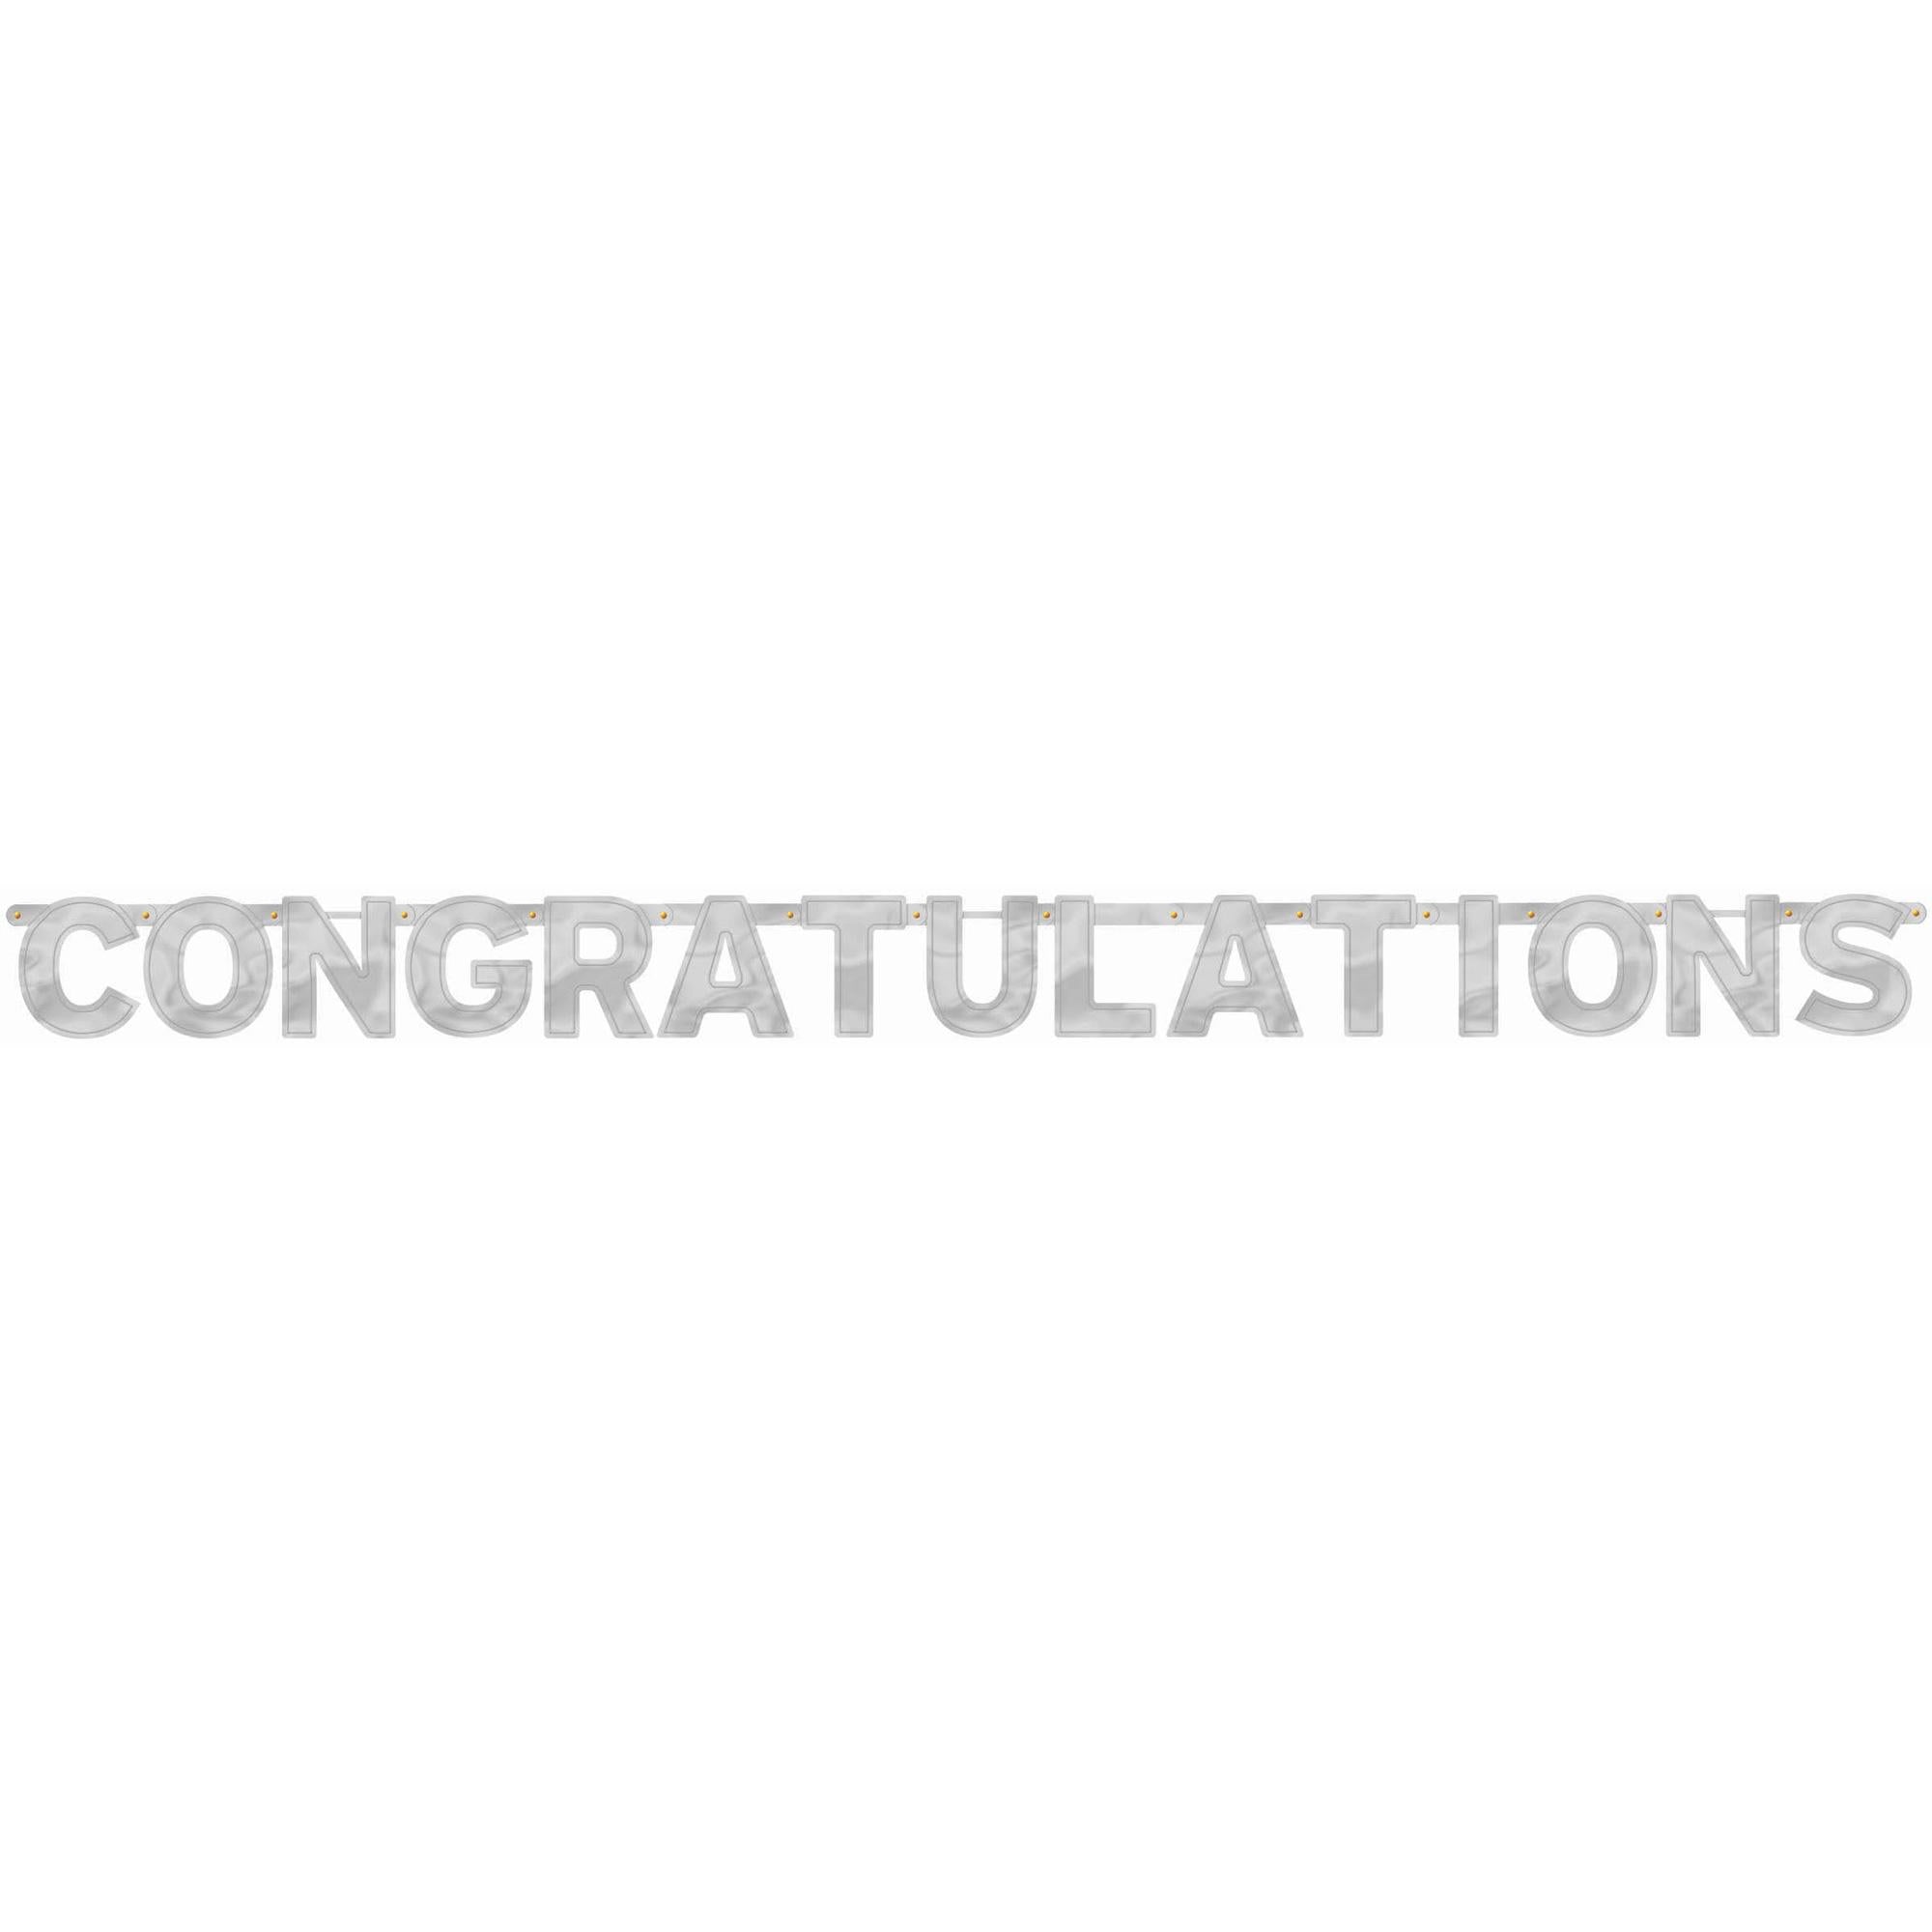 Congratulations Letter Banner 6.75 ft x 6.25in Decorations - Party Centre